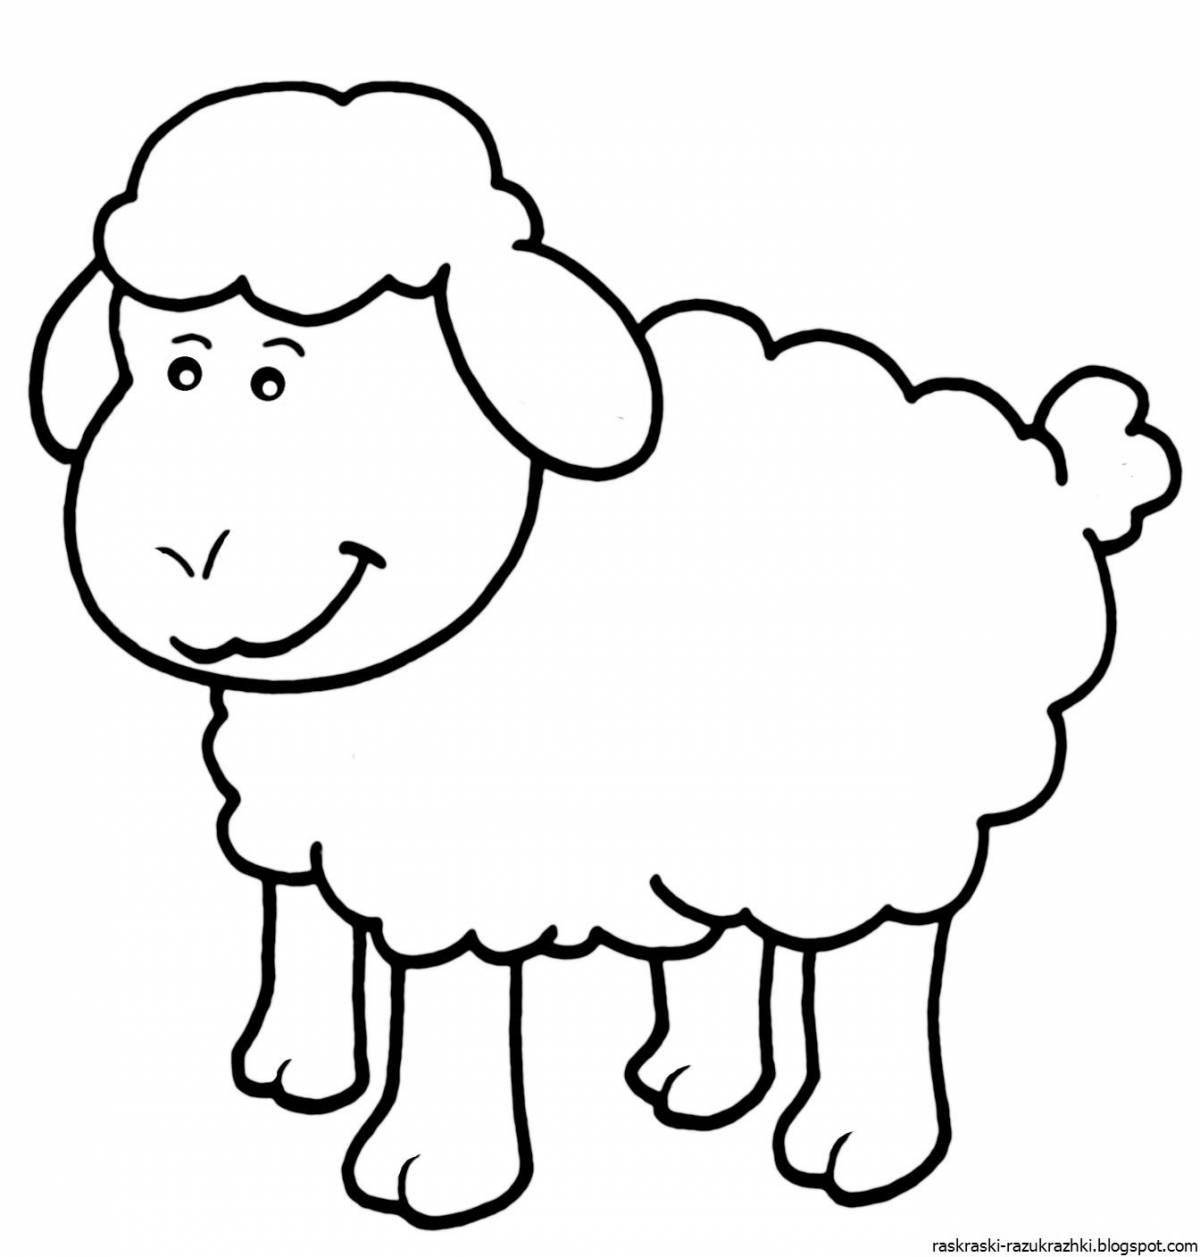 Delightful lamb coloring book for kids 3-4 years old